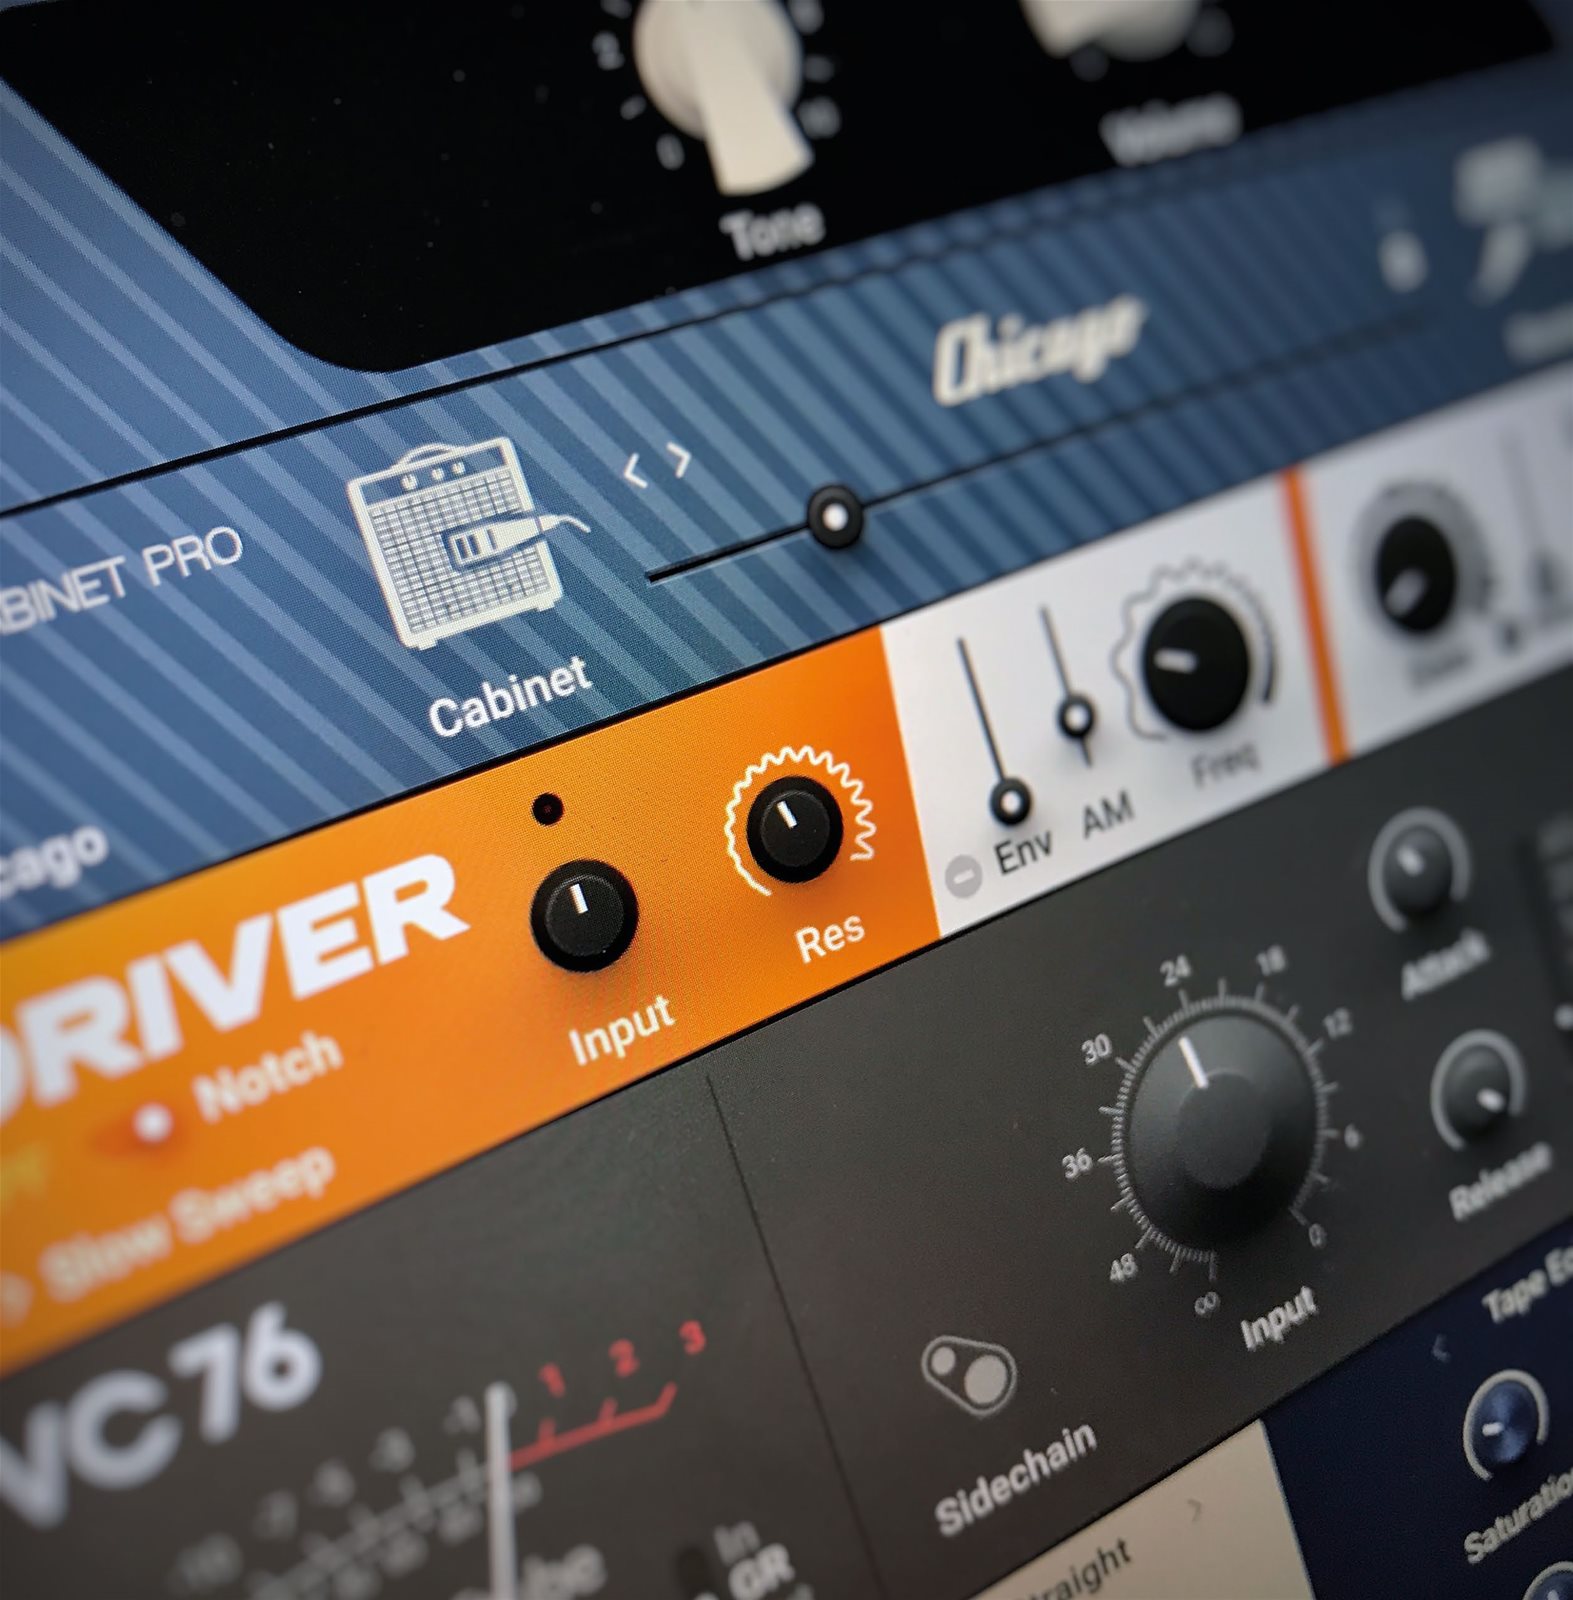 download the last version for mac Guitar Rig 6 Pro 6.4.0